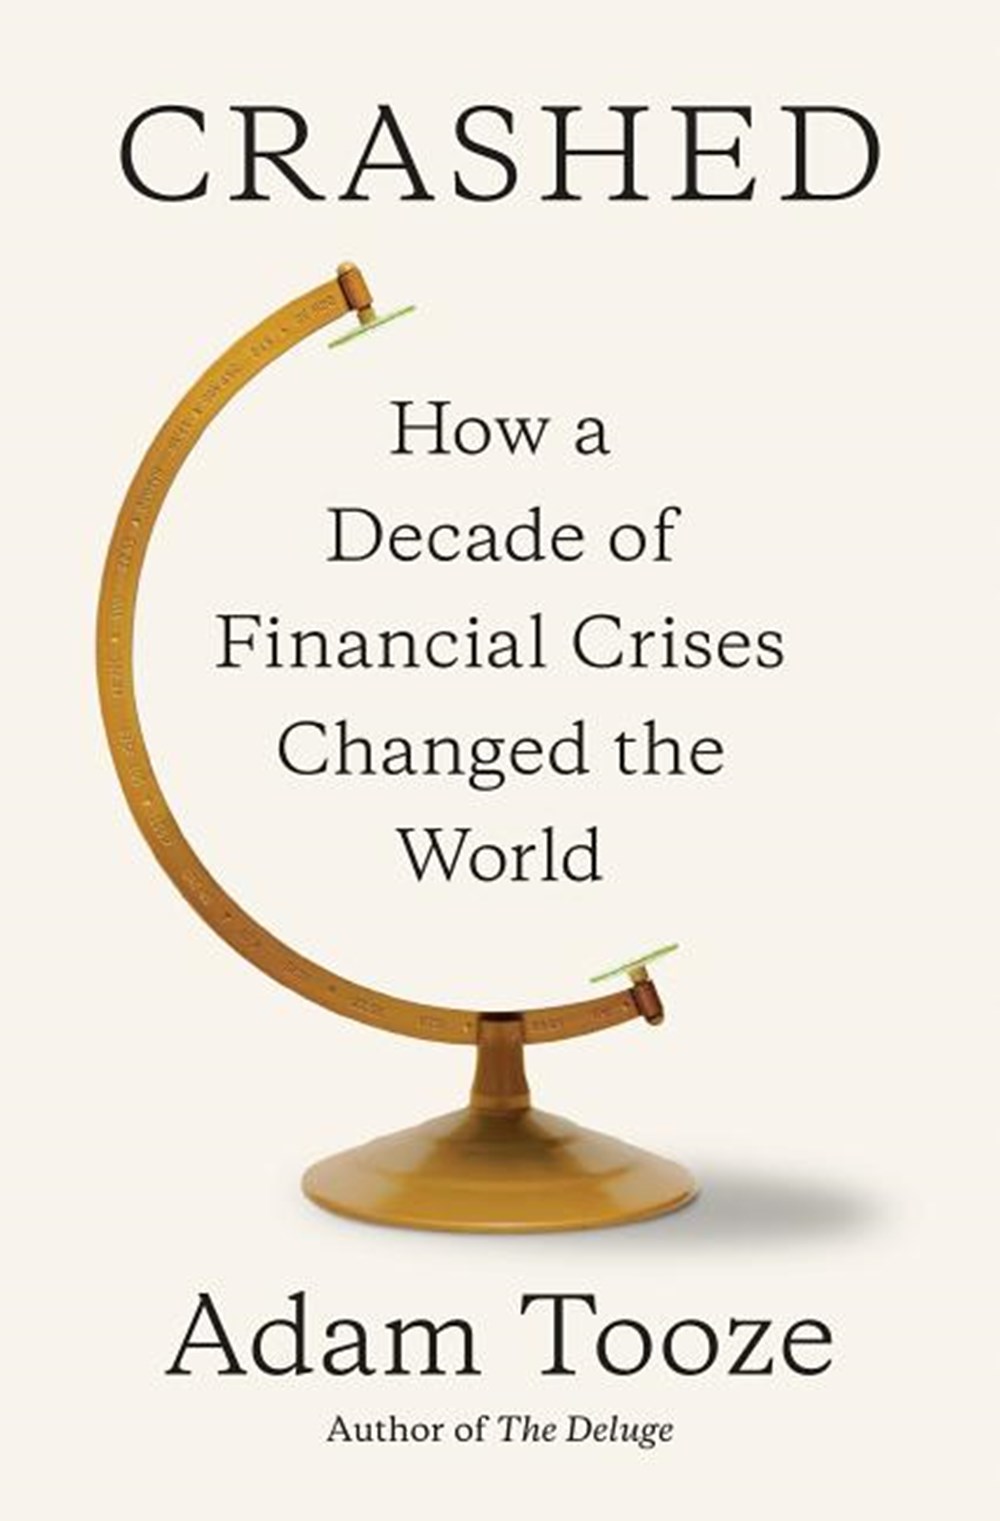 Crashed How a Decade of Financial Crises Changed the World